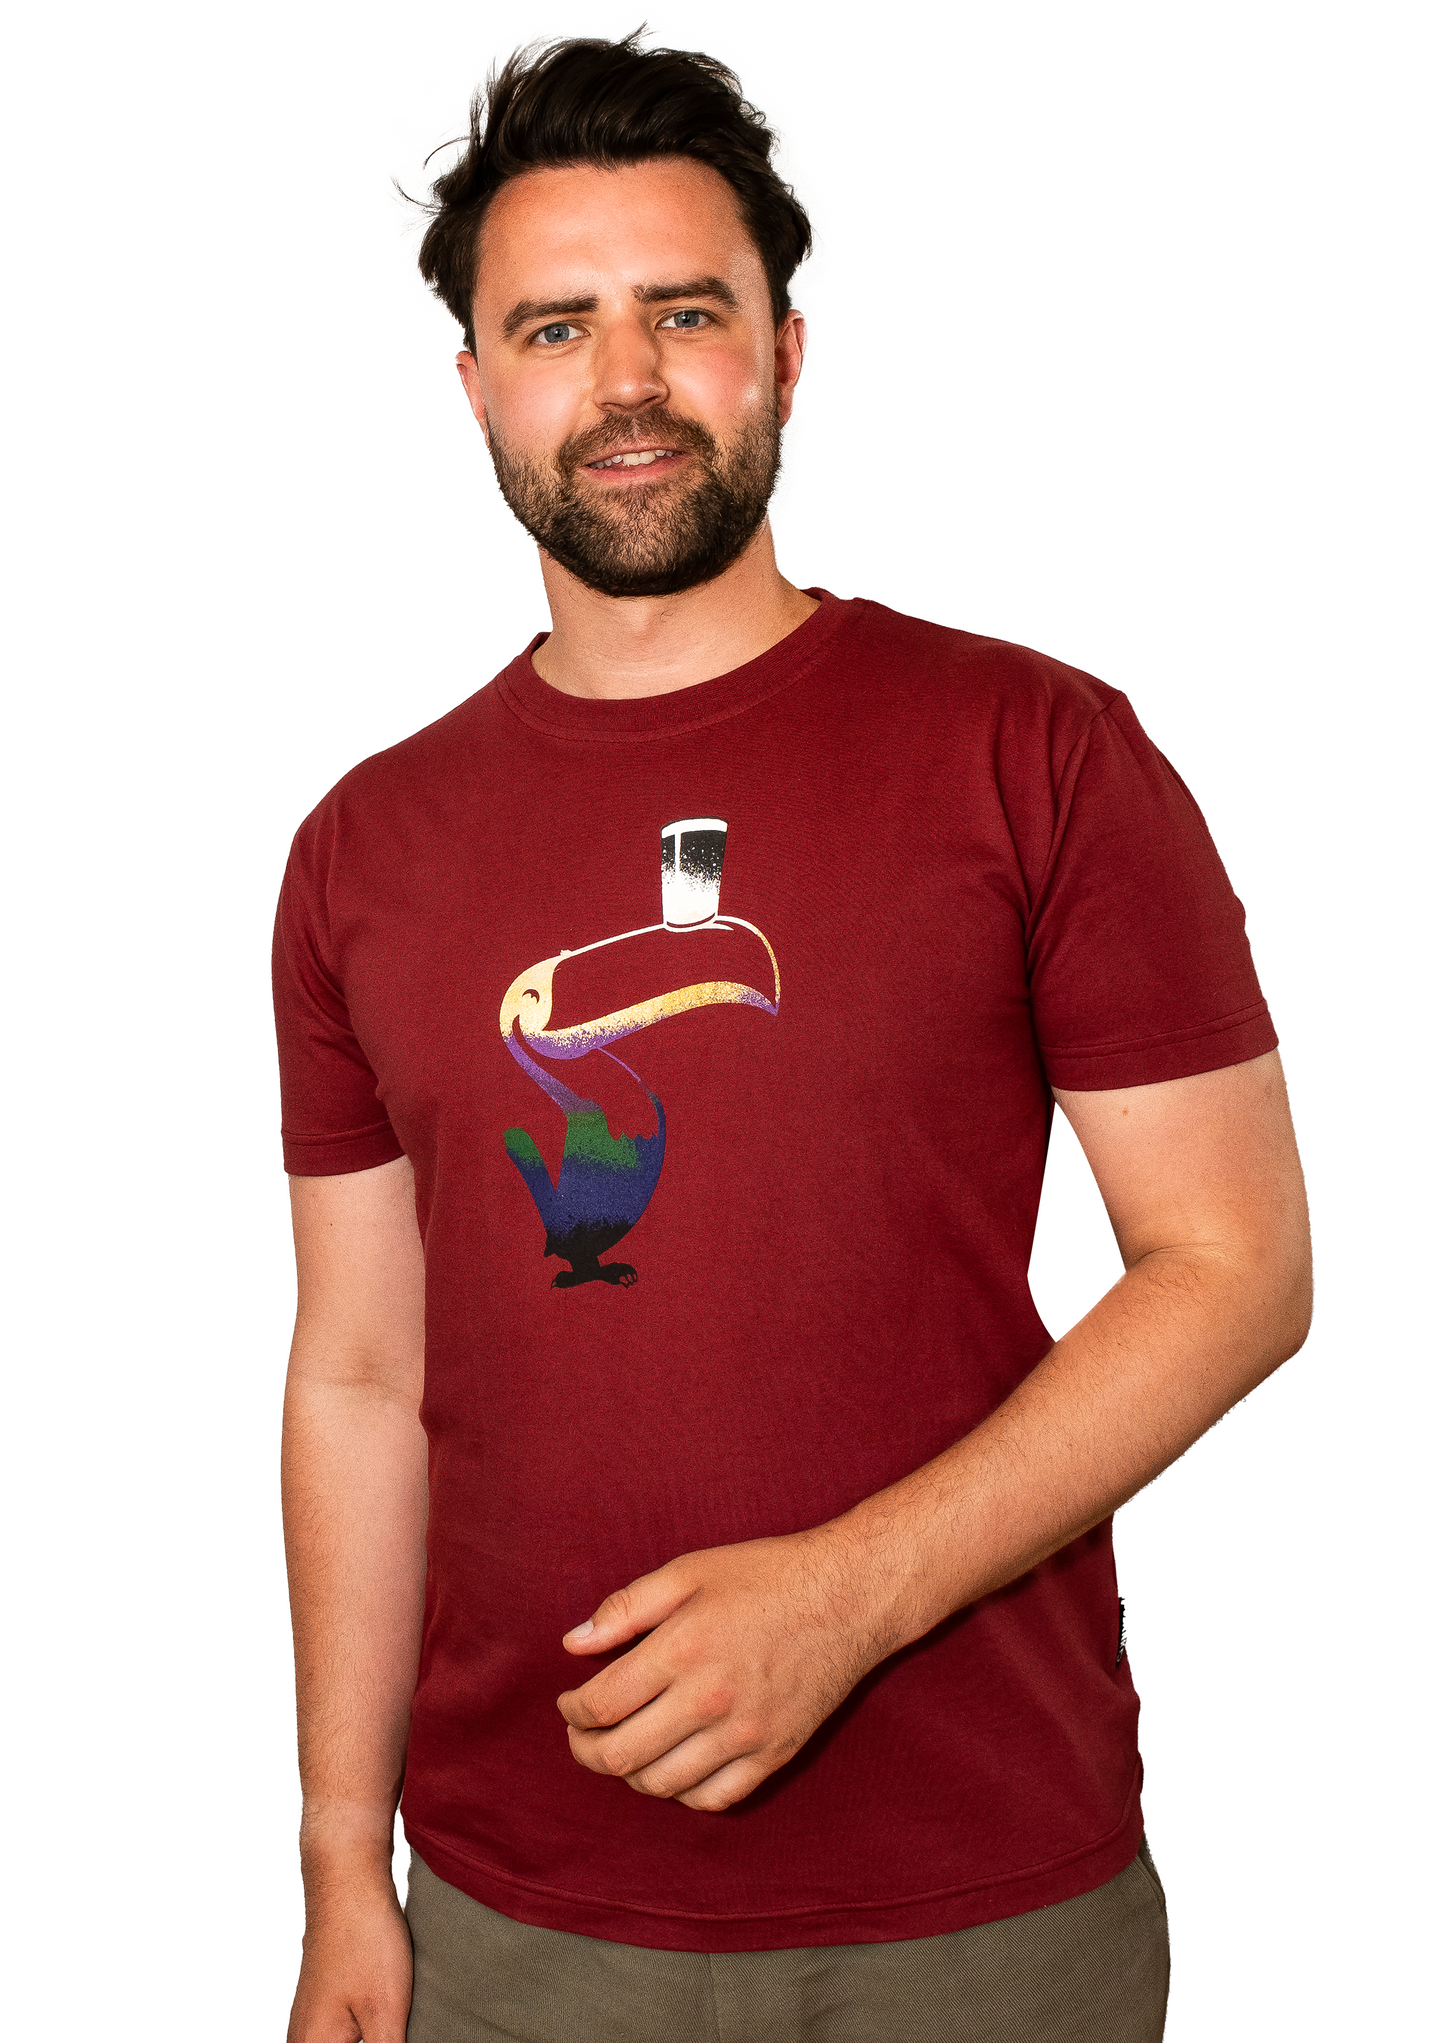 A man wearing a Guinness Liquid Toucan Tee - Red with a bird on it.